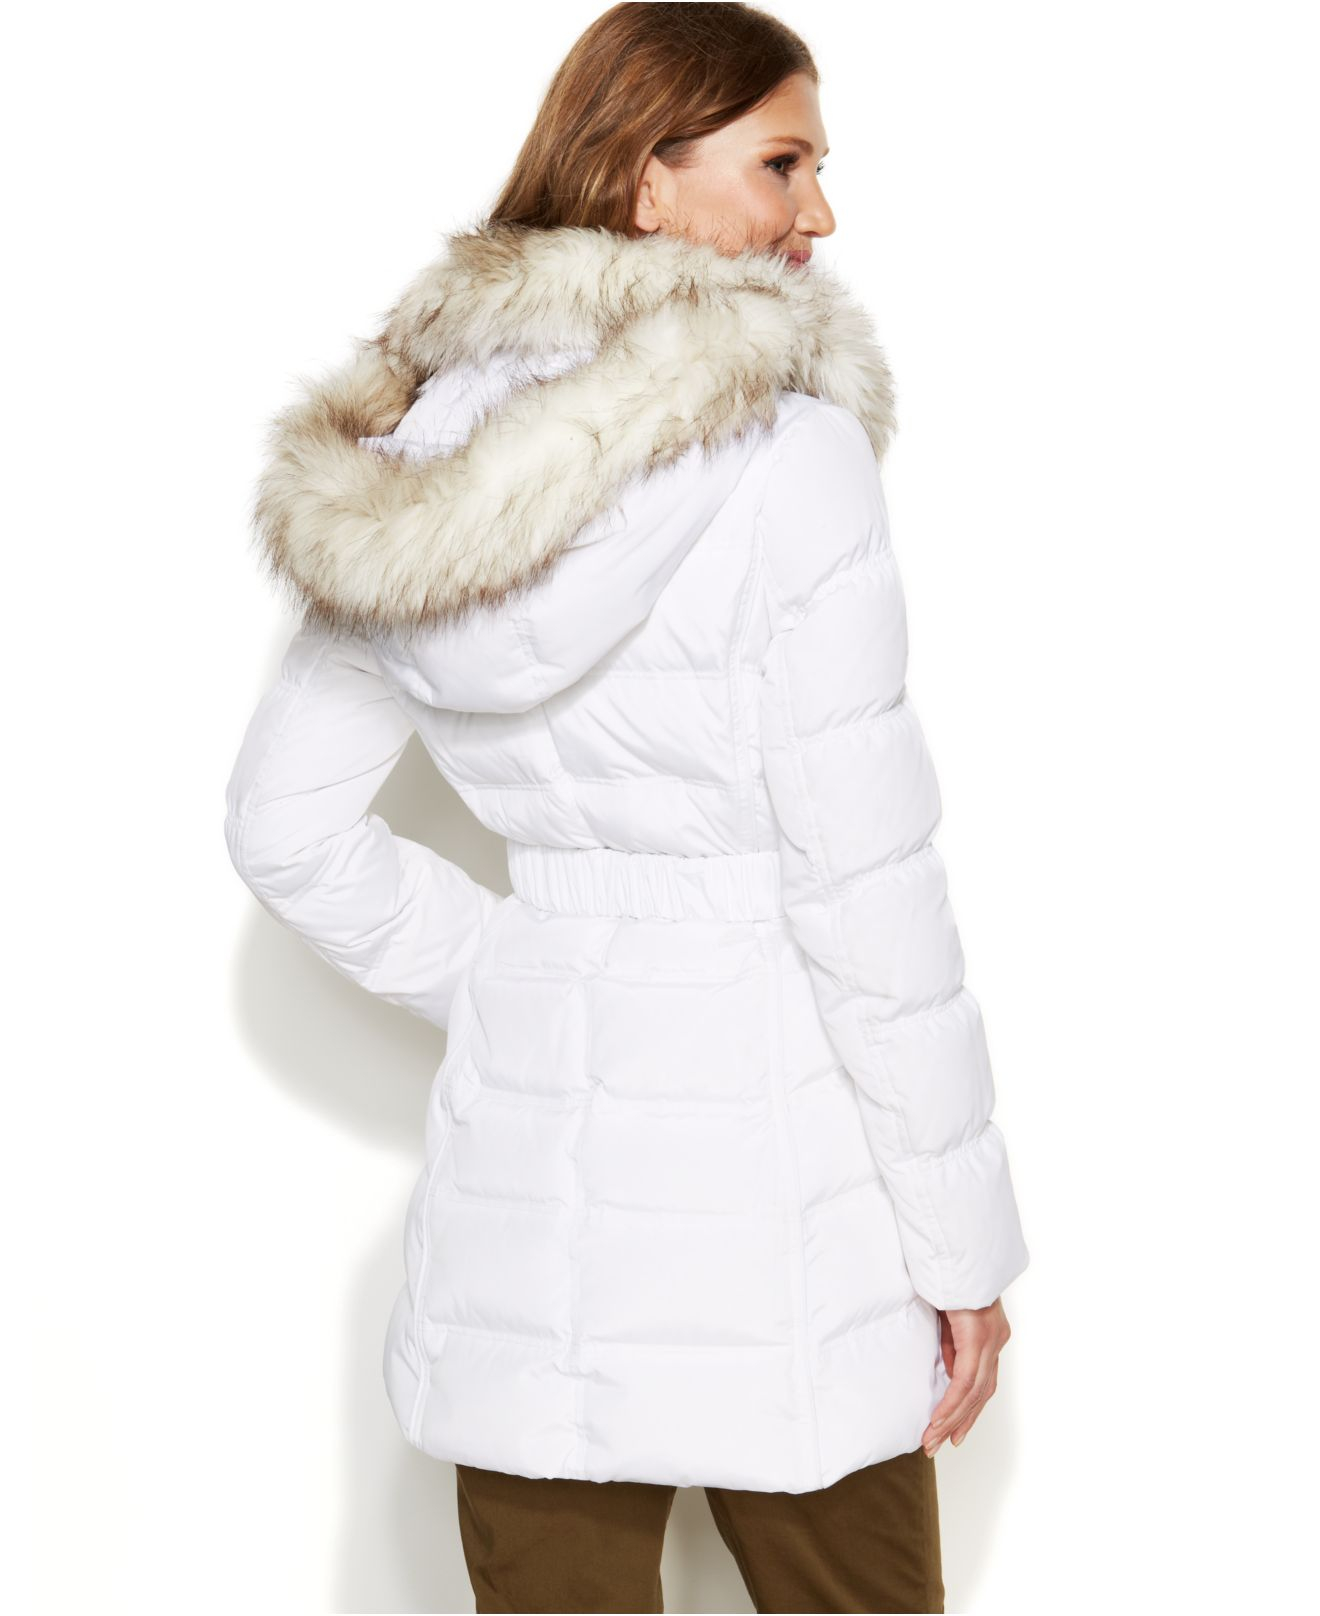 Laundry by shelli segal Faux-Fur-Hooded Down Puffer Coat in White ...